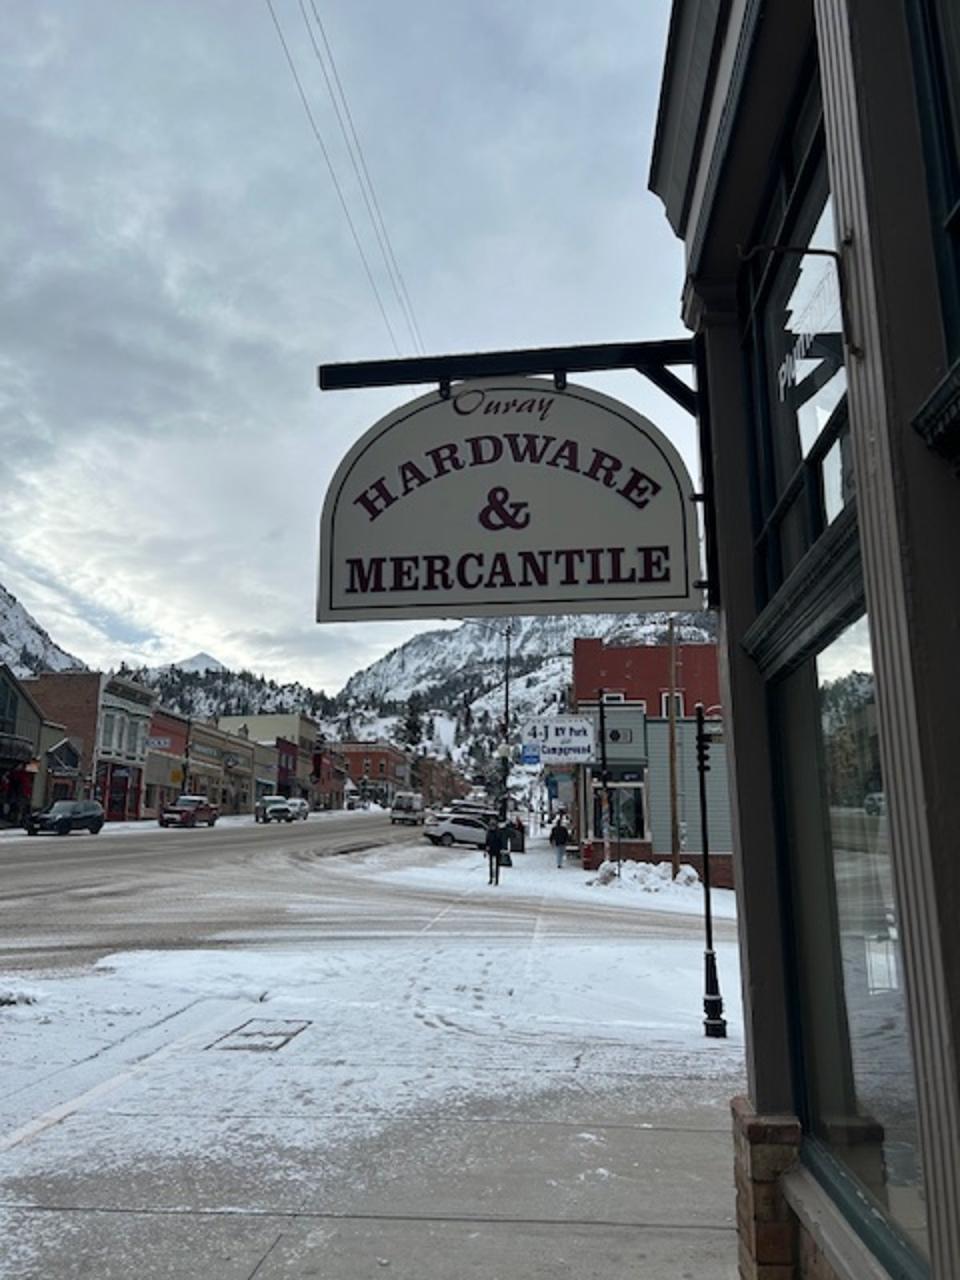 The mountain of Ouray in southwest Colorado – known for ice climbing, skijoring and the Million Dollar Highway – is about a five and a half hour drive from Denver (Sheila Flynn)